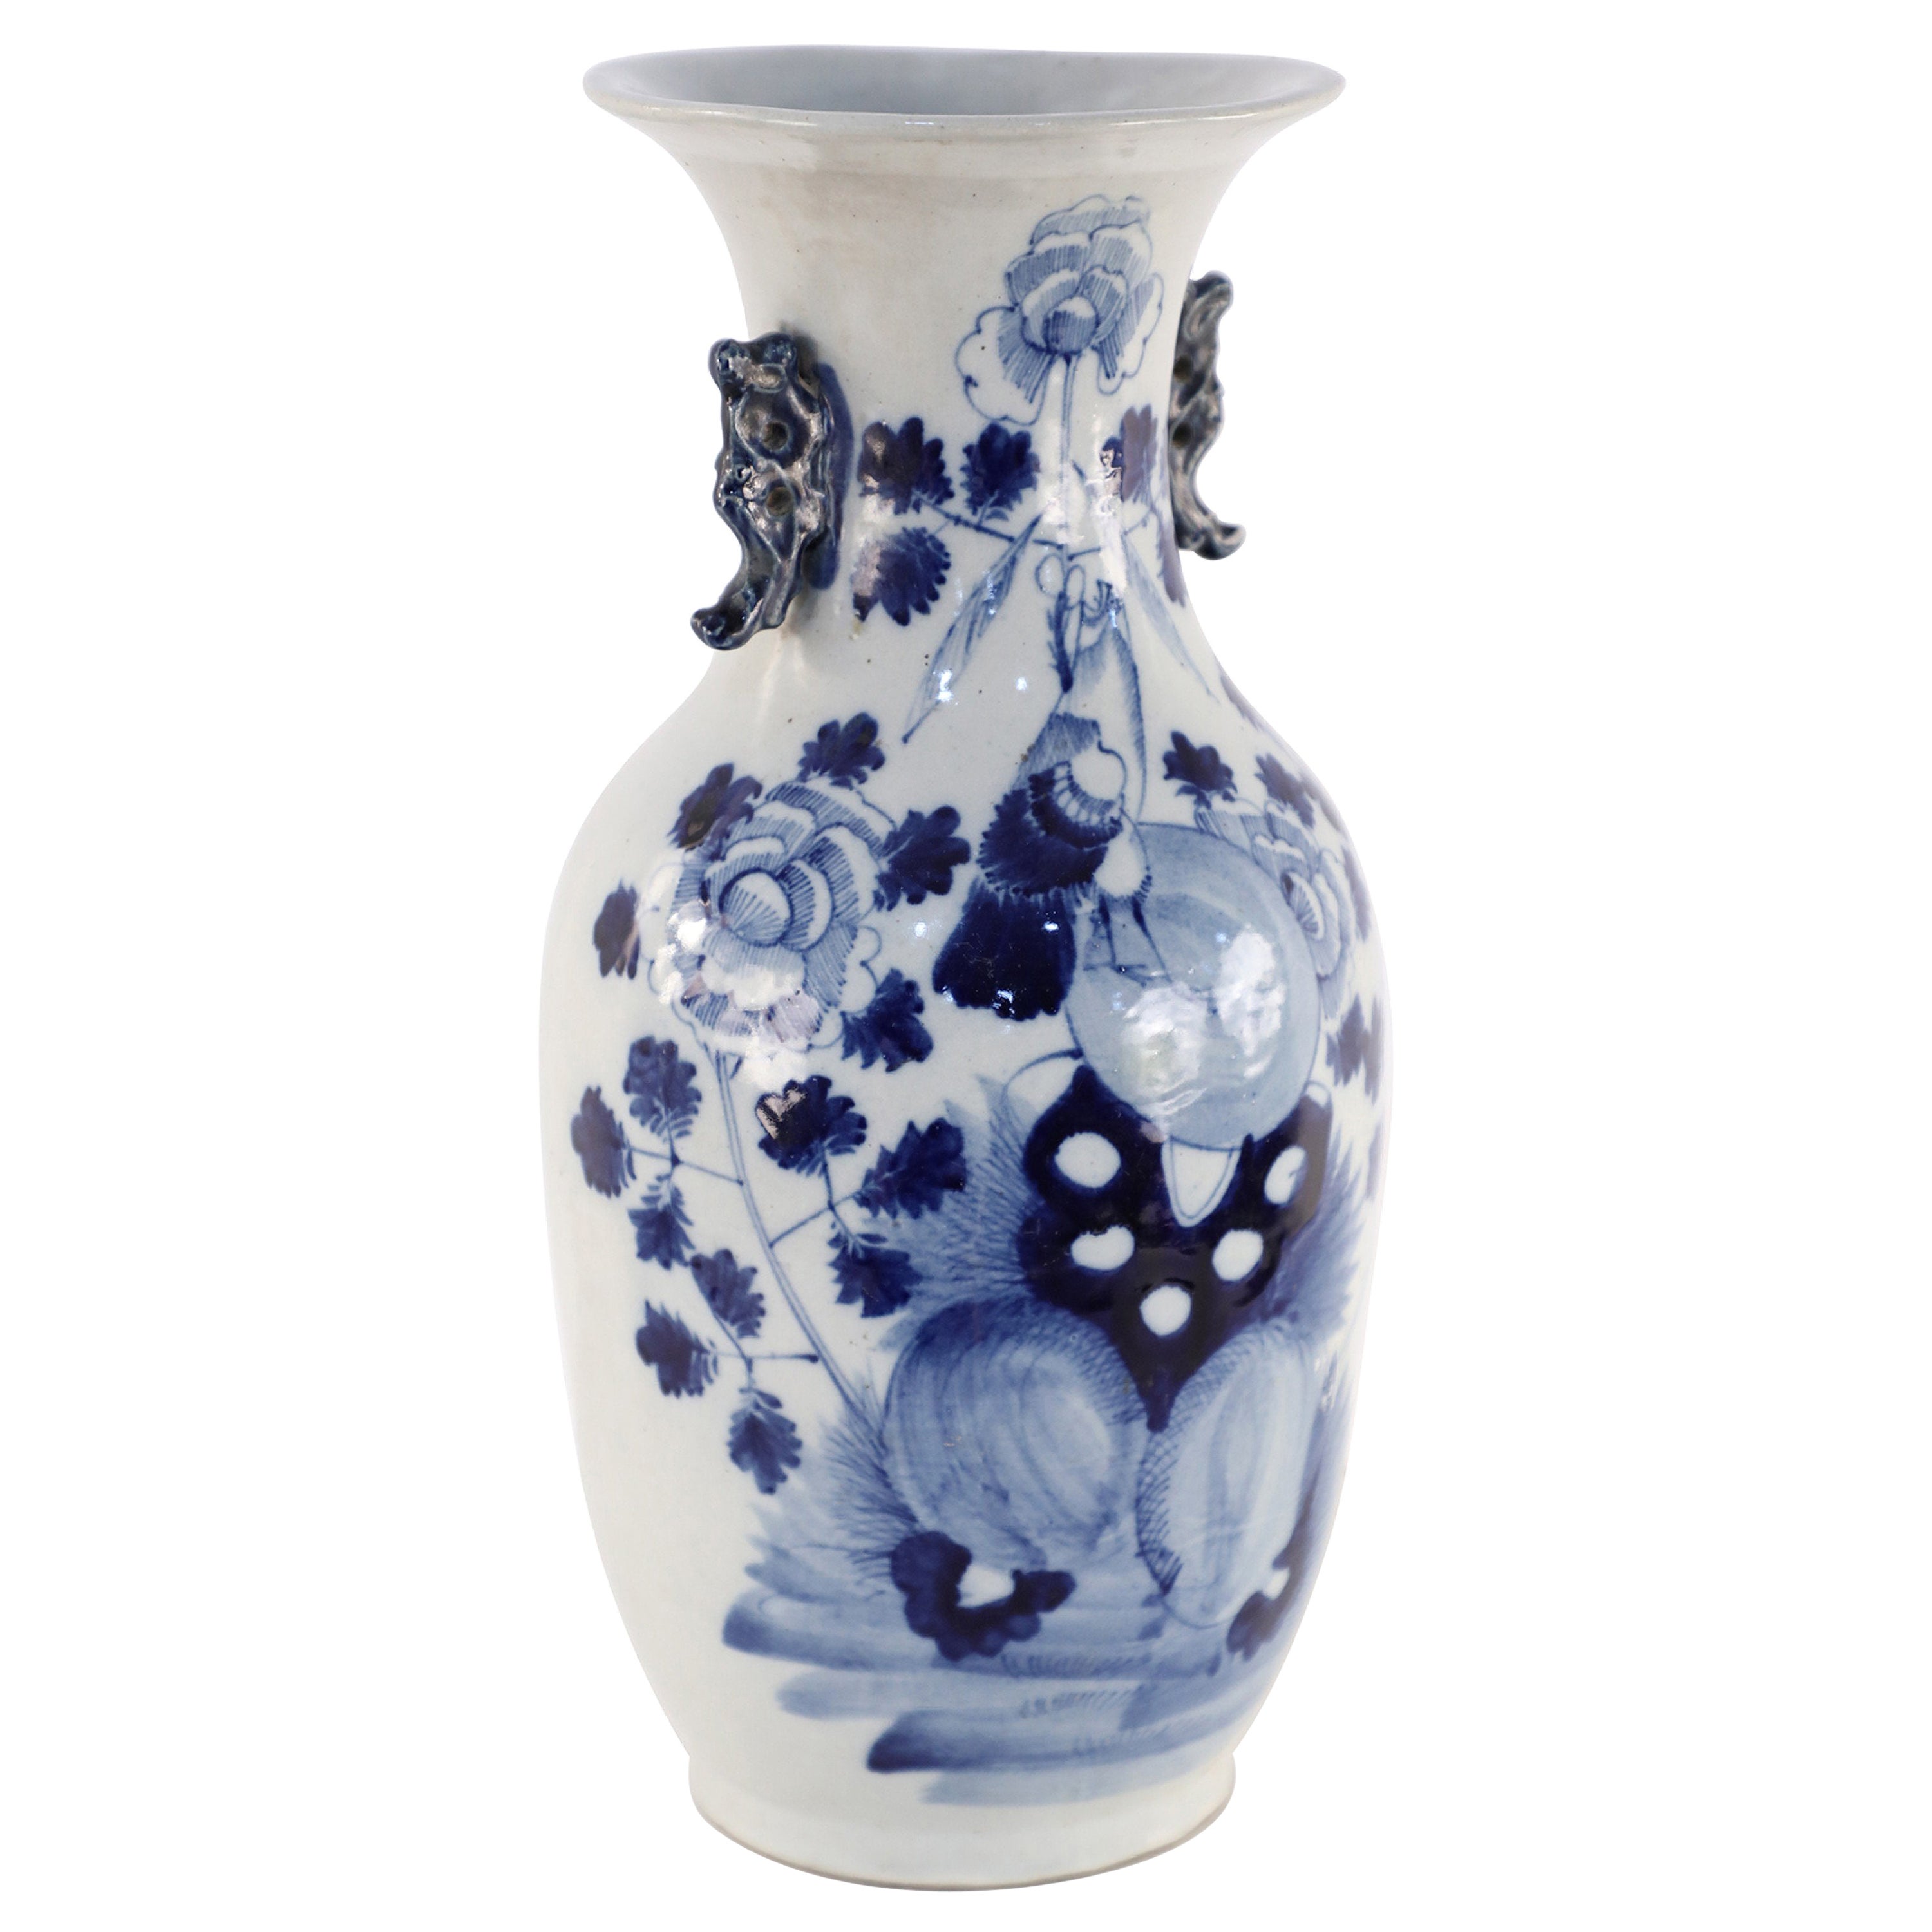 Chinese White and Blue Lily Pad and Floral Design Porcelain Urn